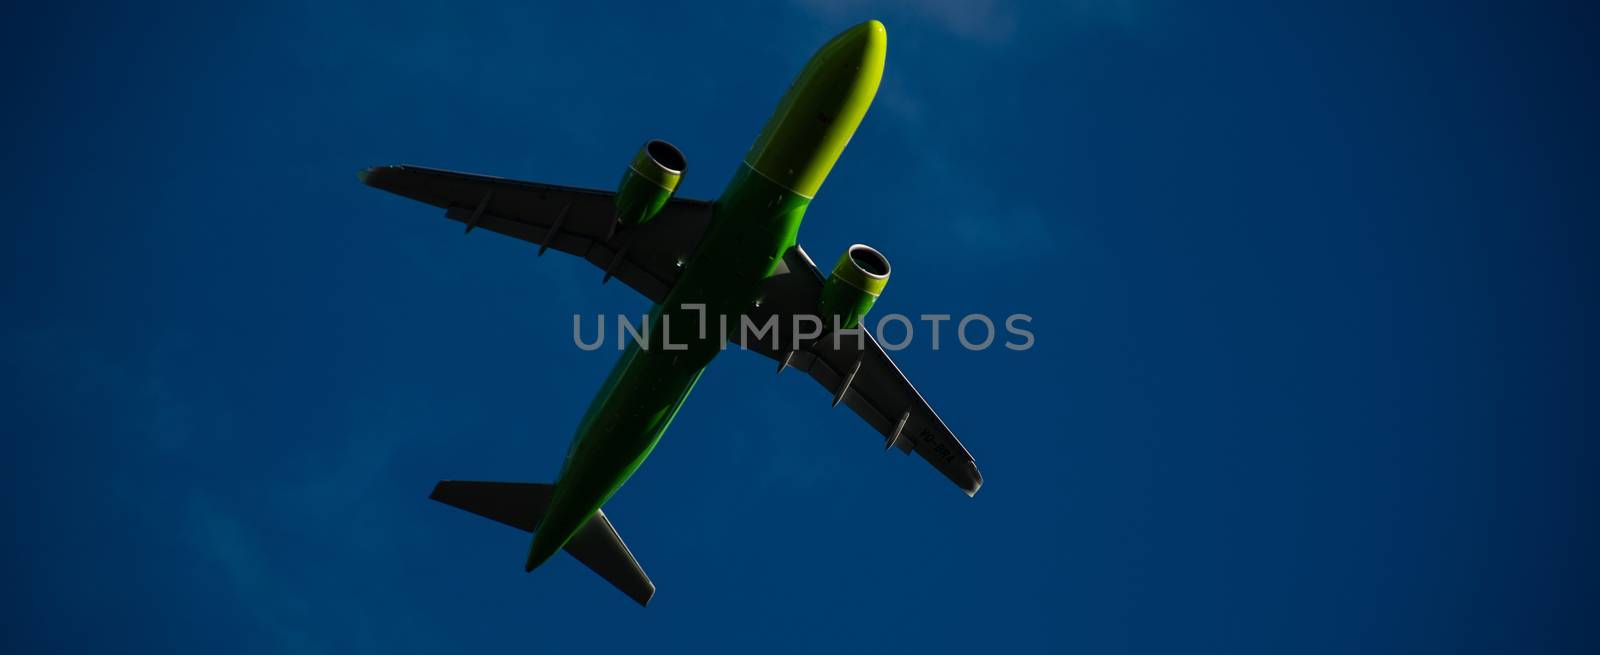 Silhouette of a green plane taking off against a blue sky